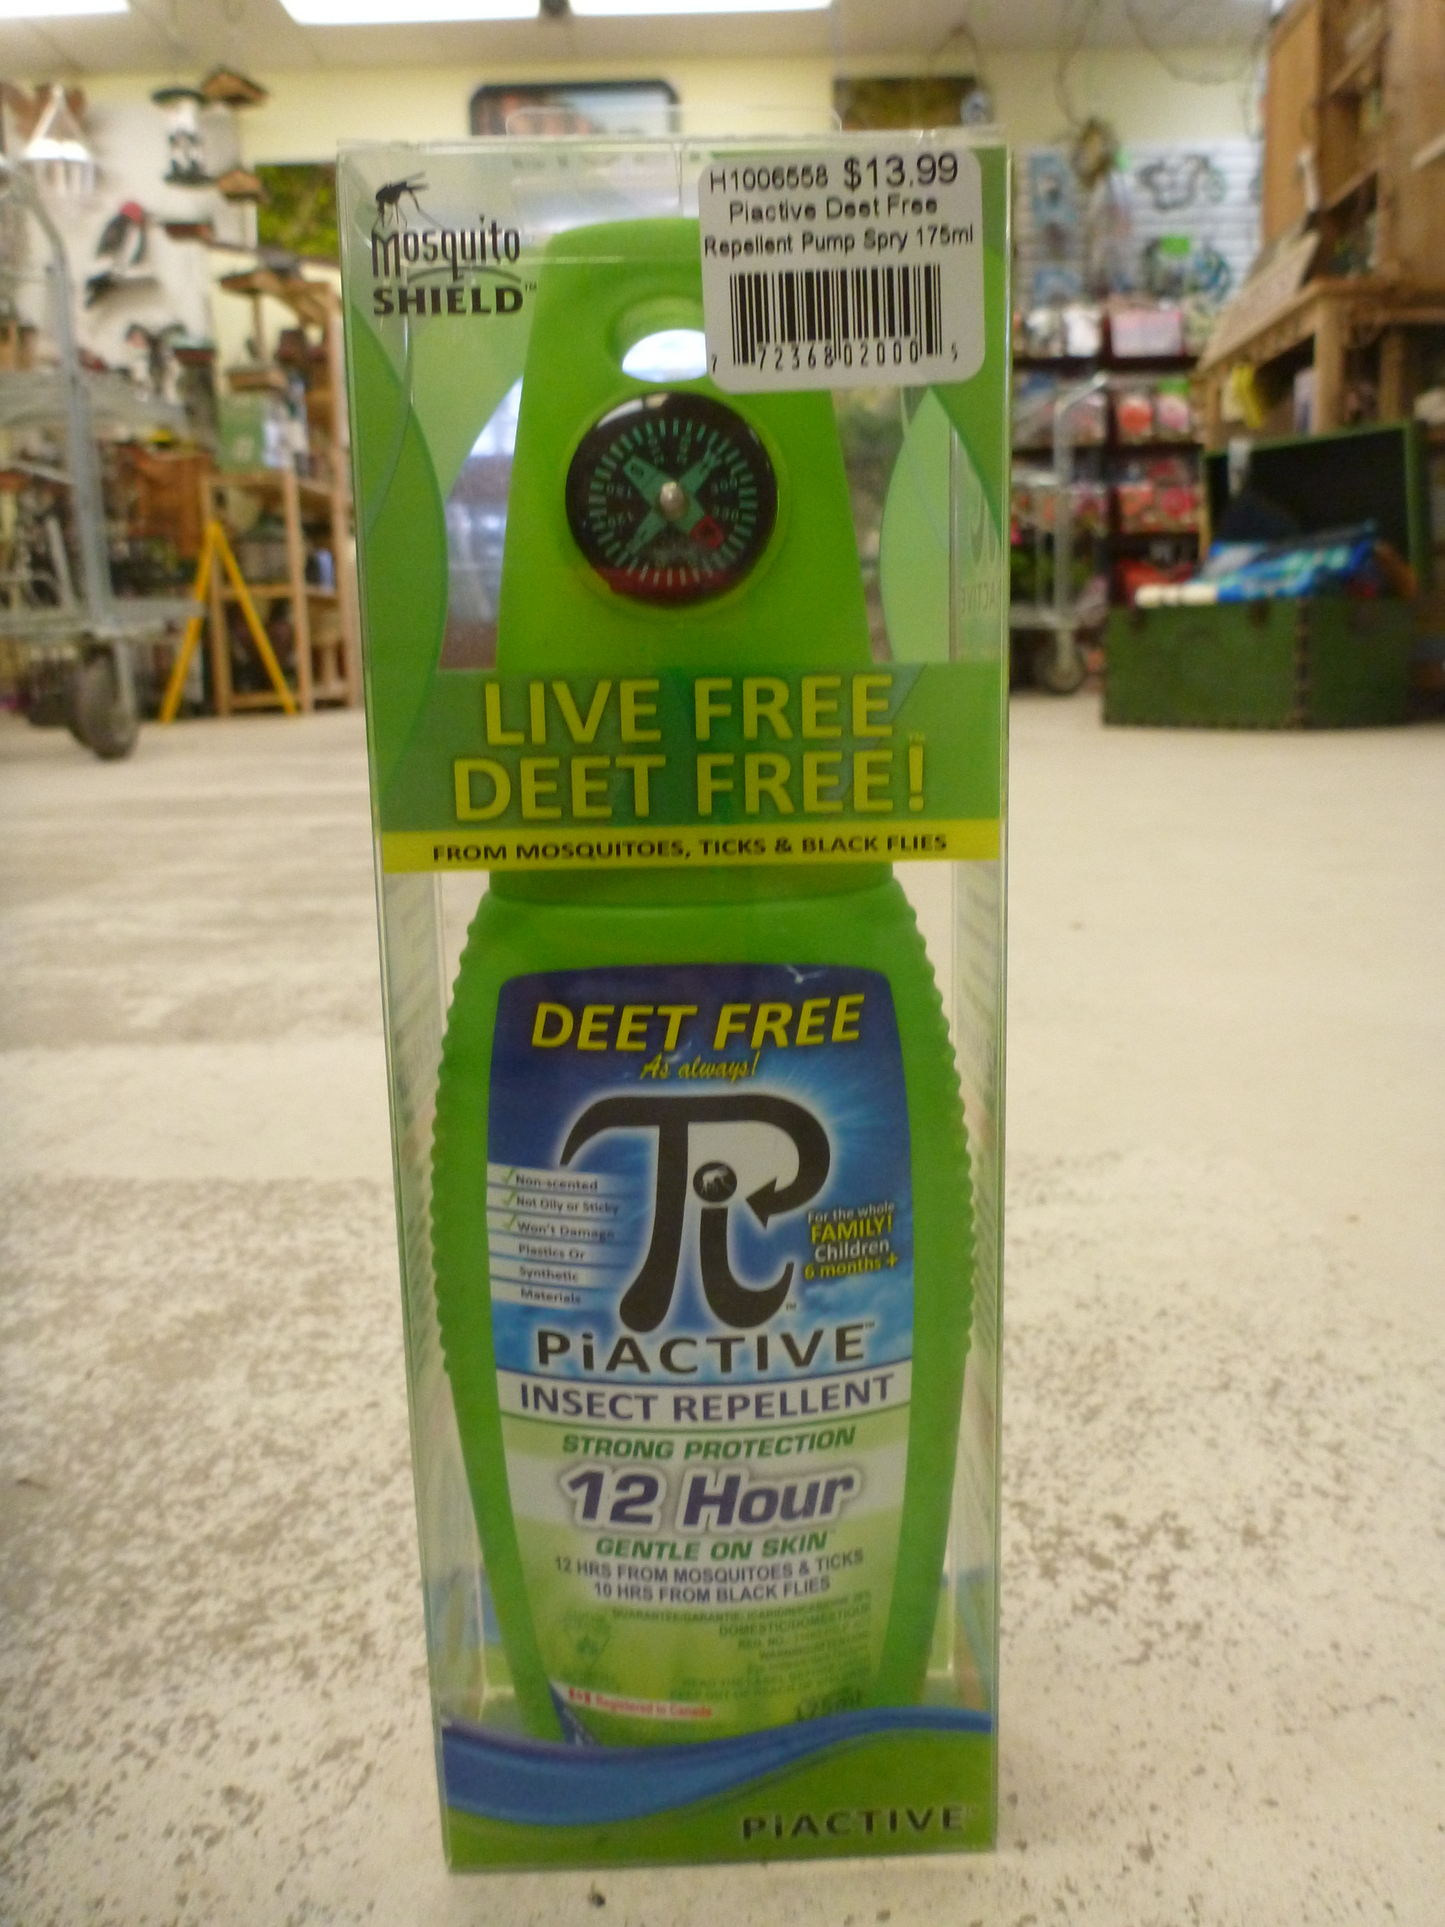 Piactive Deef Free Insect Repellent - Pump Spray 175ml